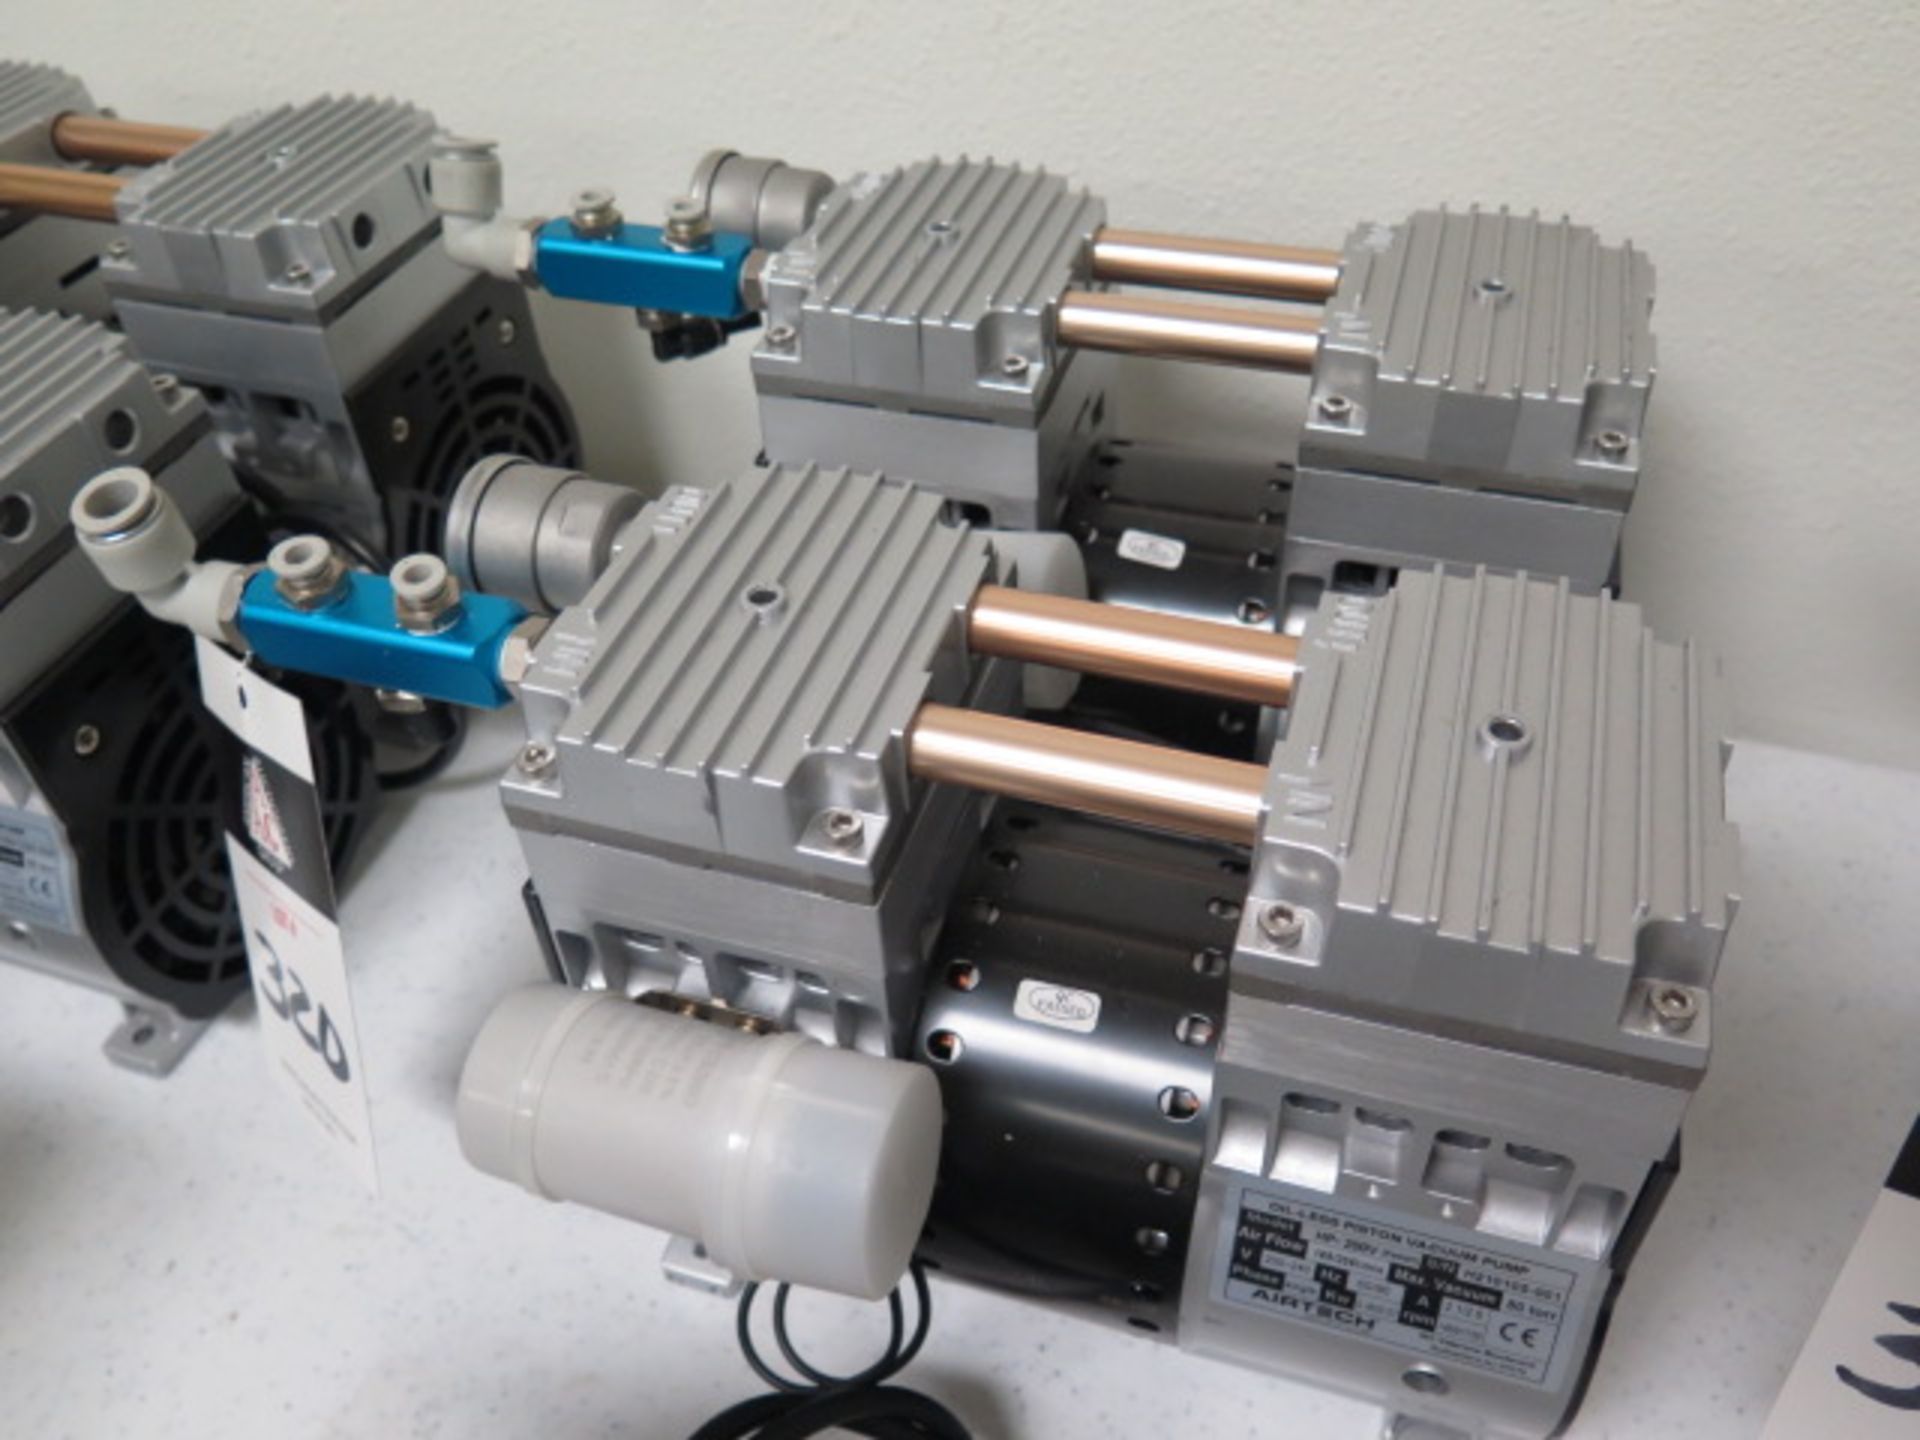 Airtech HP-200V 80 torr Vacuum Pumps (2) 200-240V (SOLD AS-IS - NO WARRANTY) - Image 2 of 5